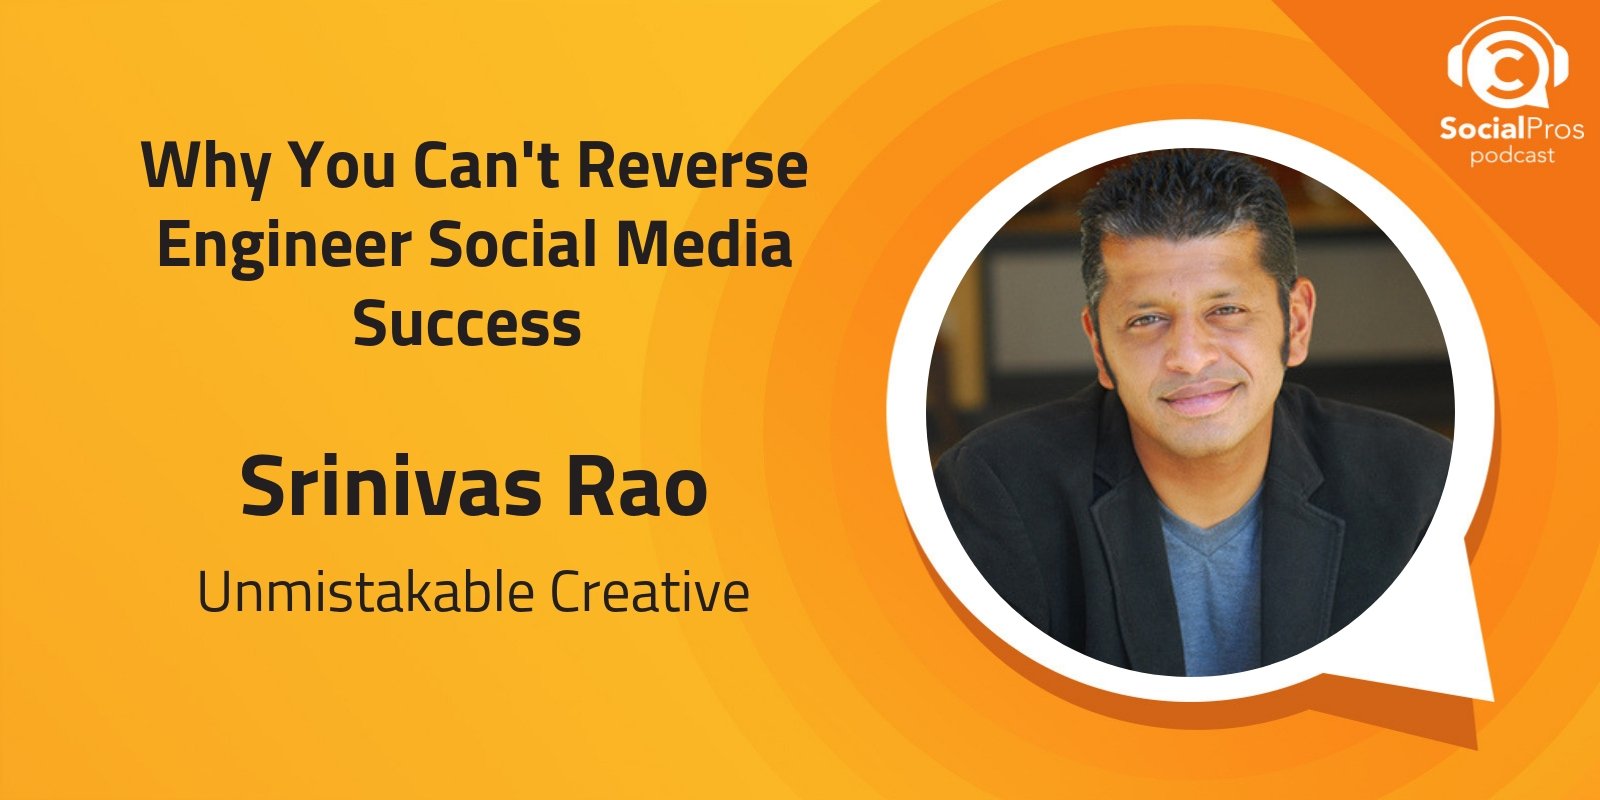 Why You Can't Reverse Engineer Social Media Success